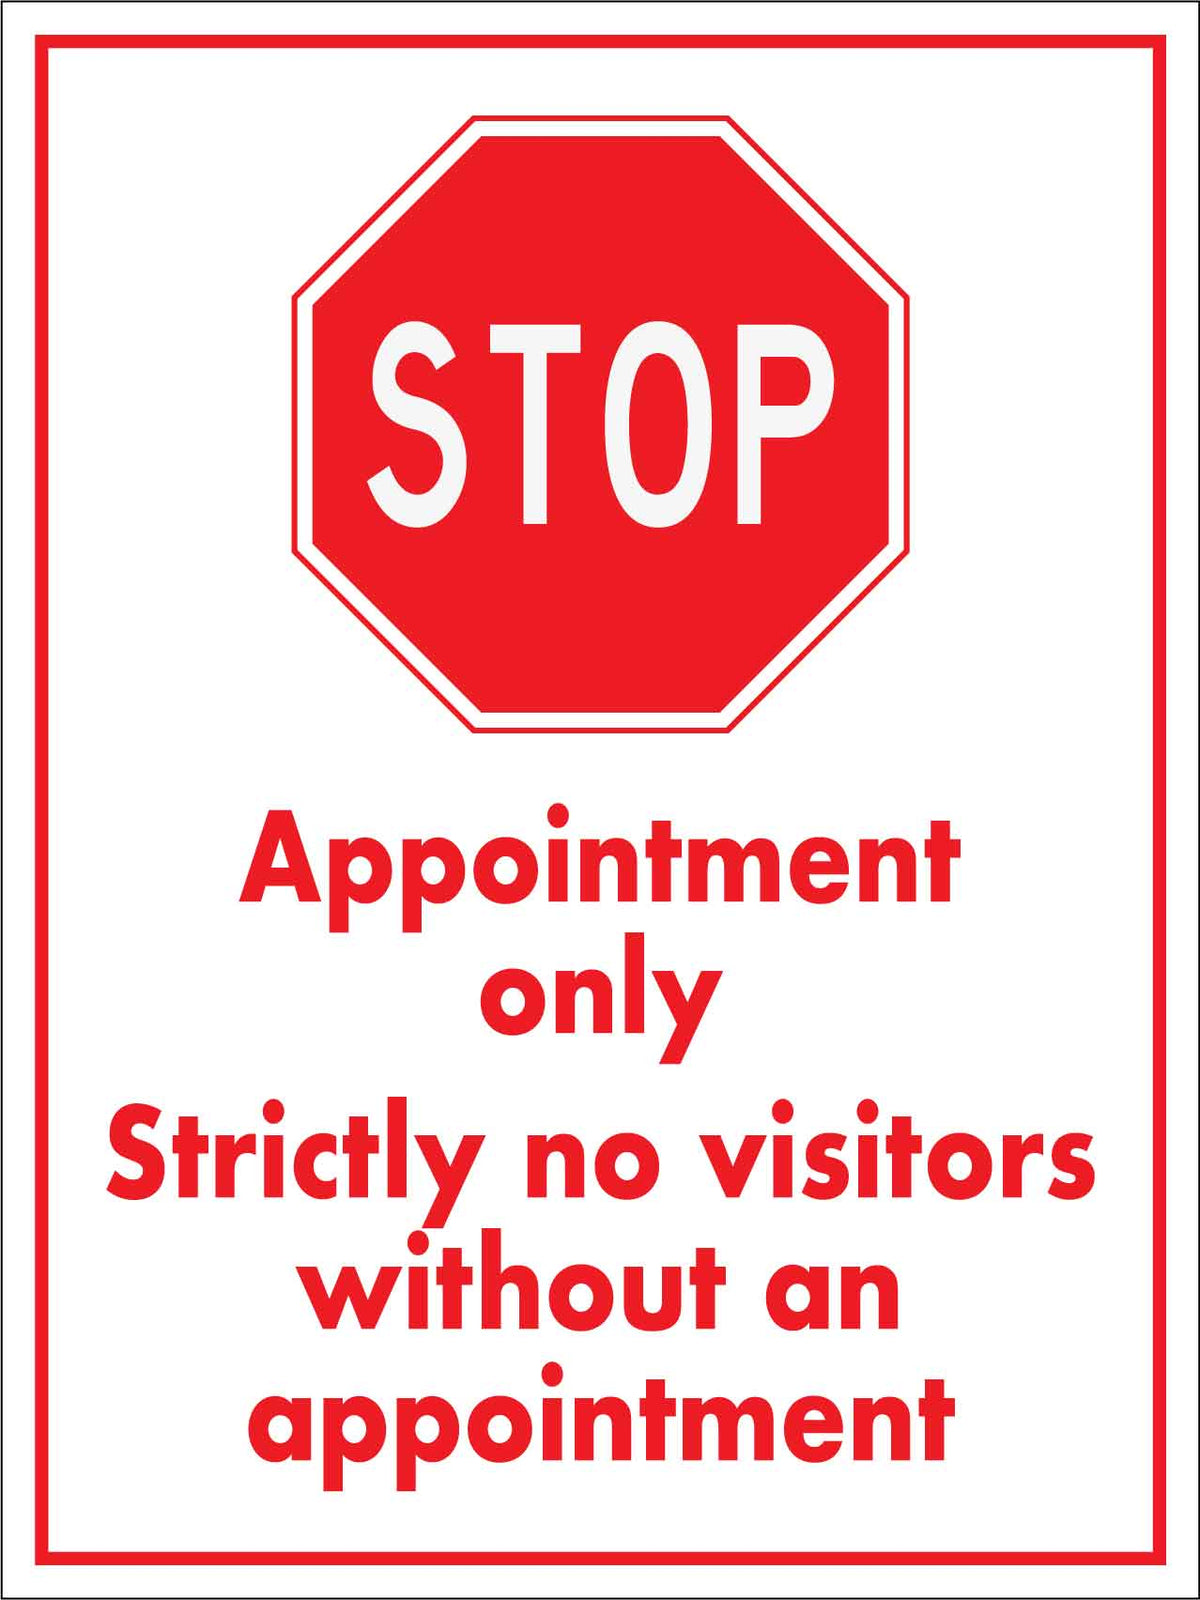 a sales visit without an appointment